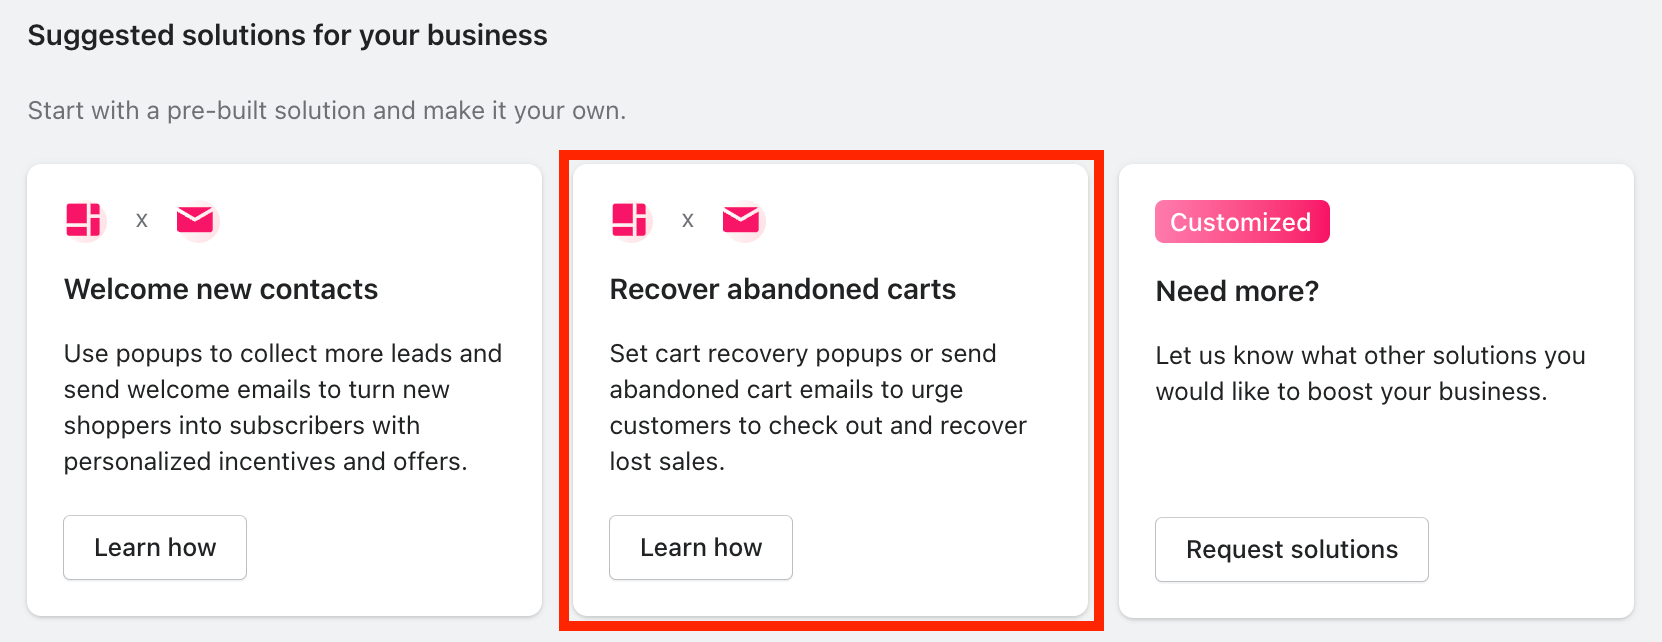 eCommerce solutions (Recover abandoned carts)